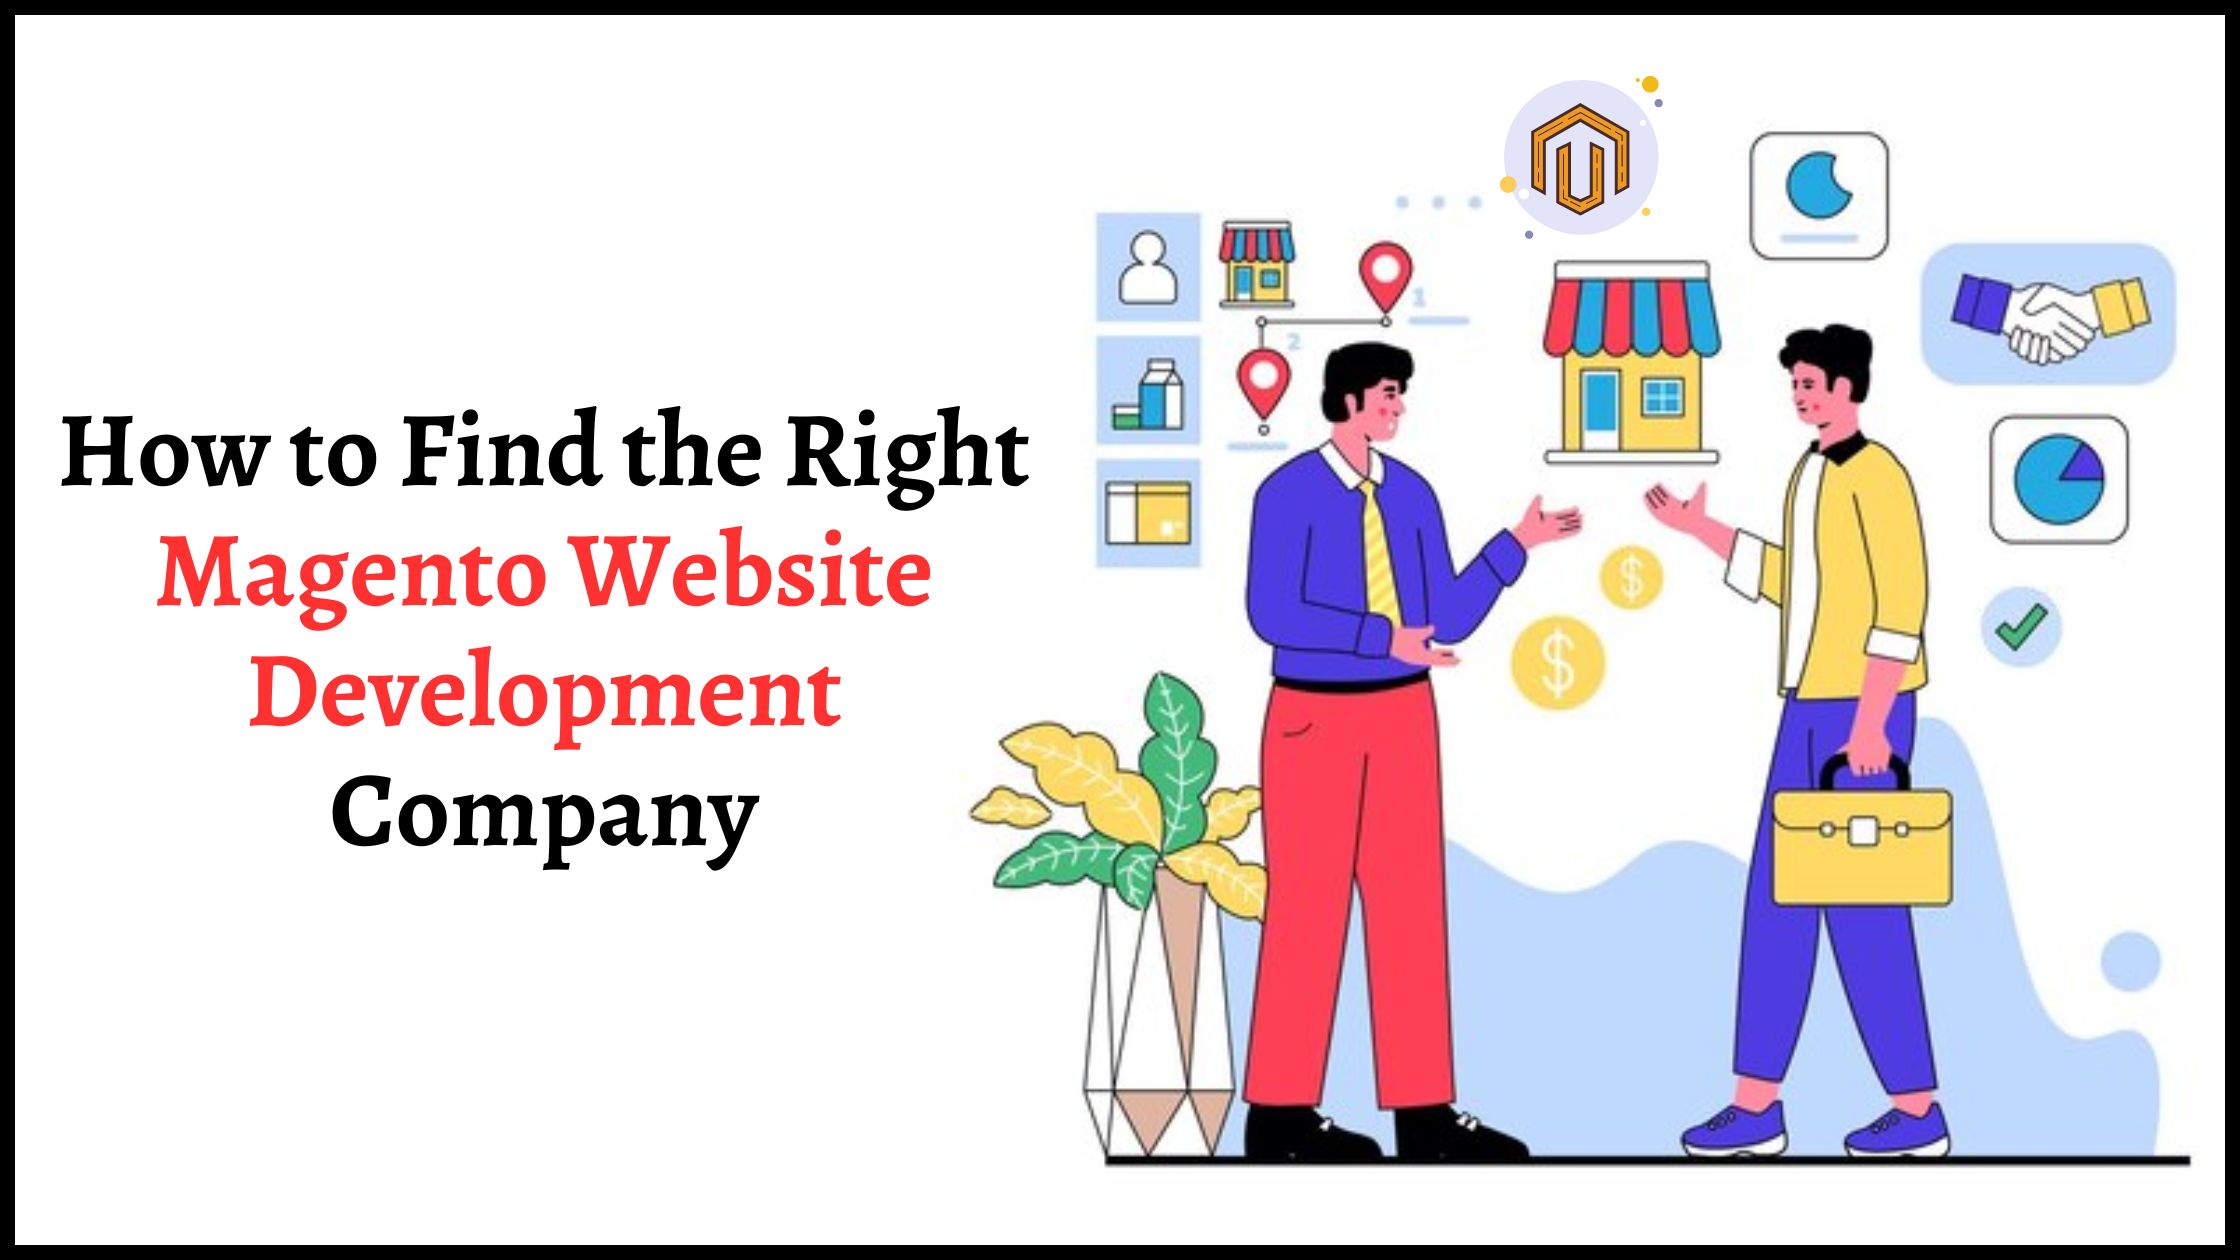 How to Find the Right Magento Website Development Company?